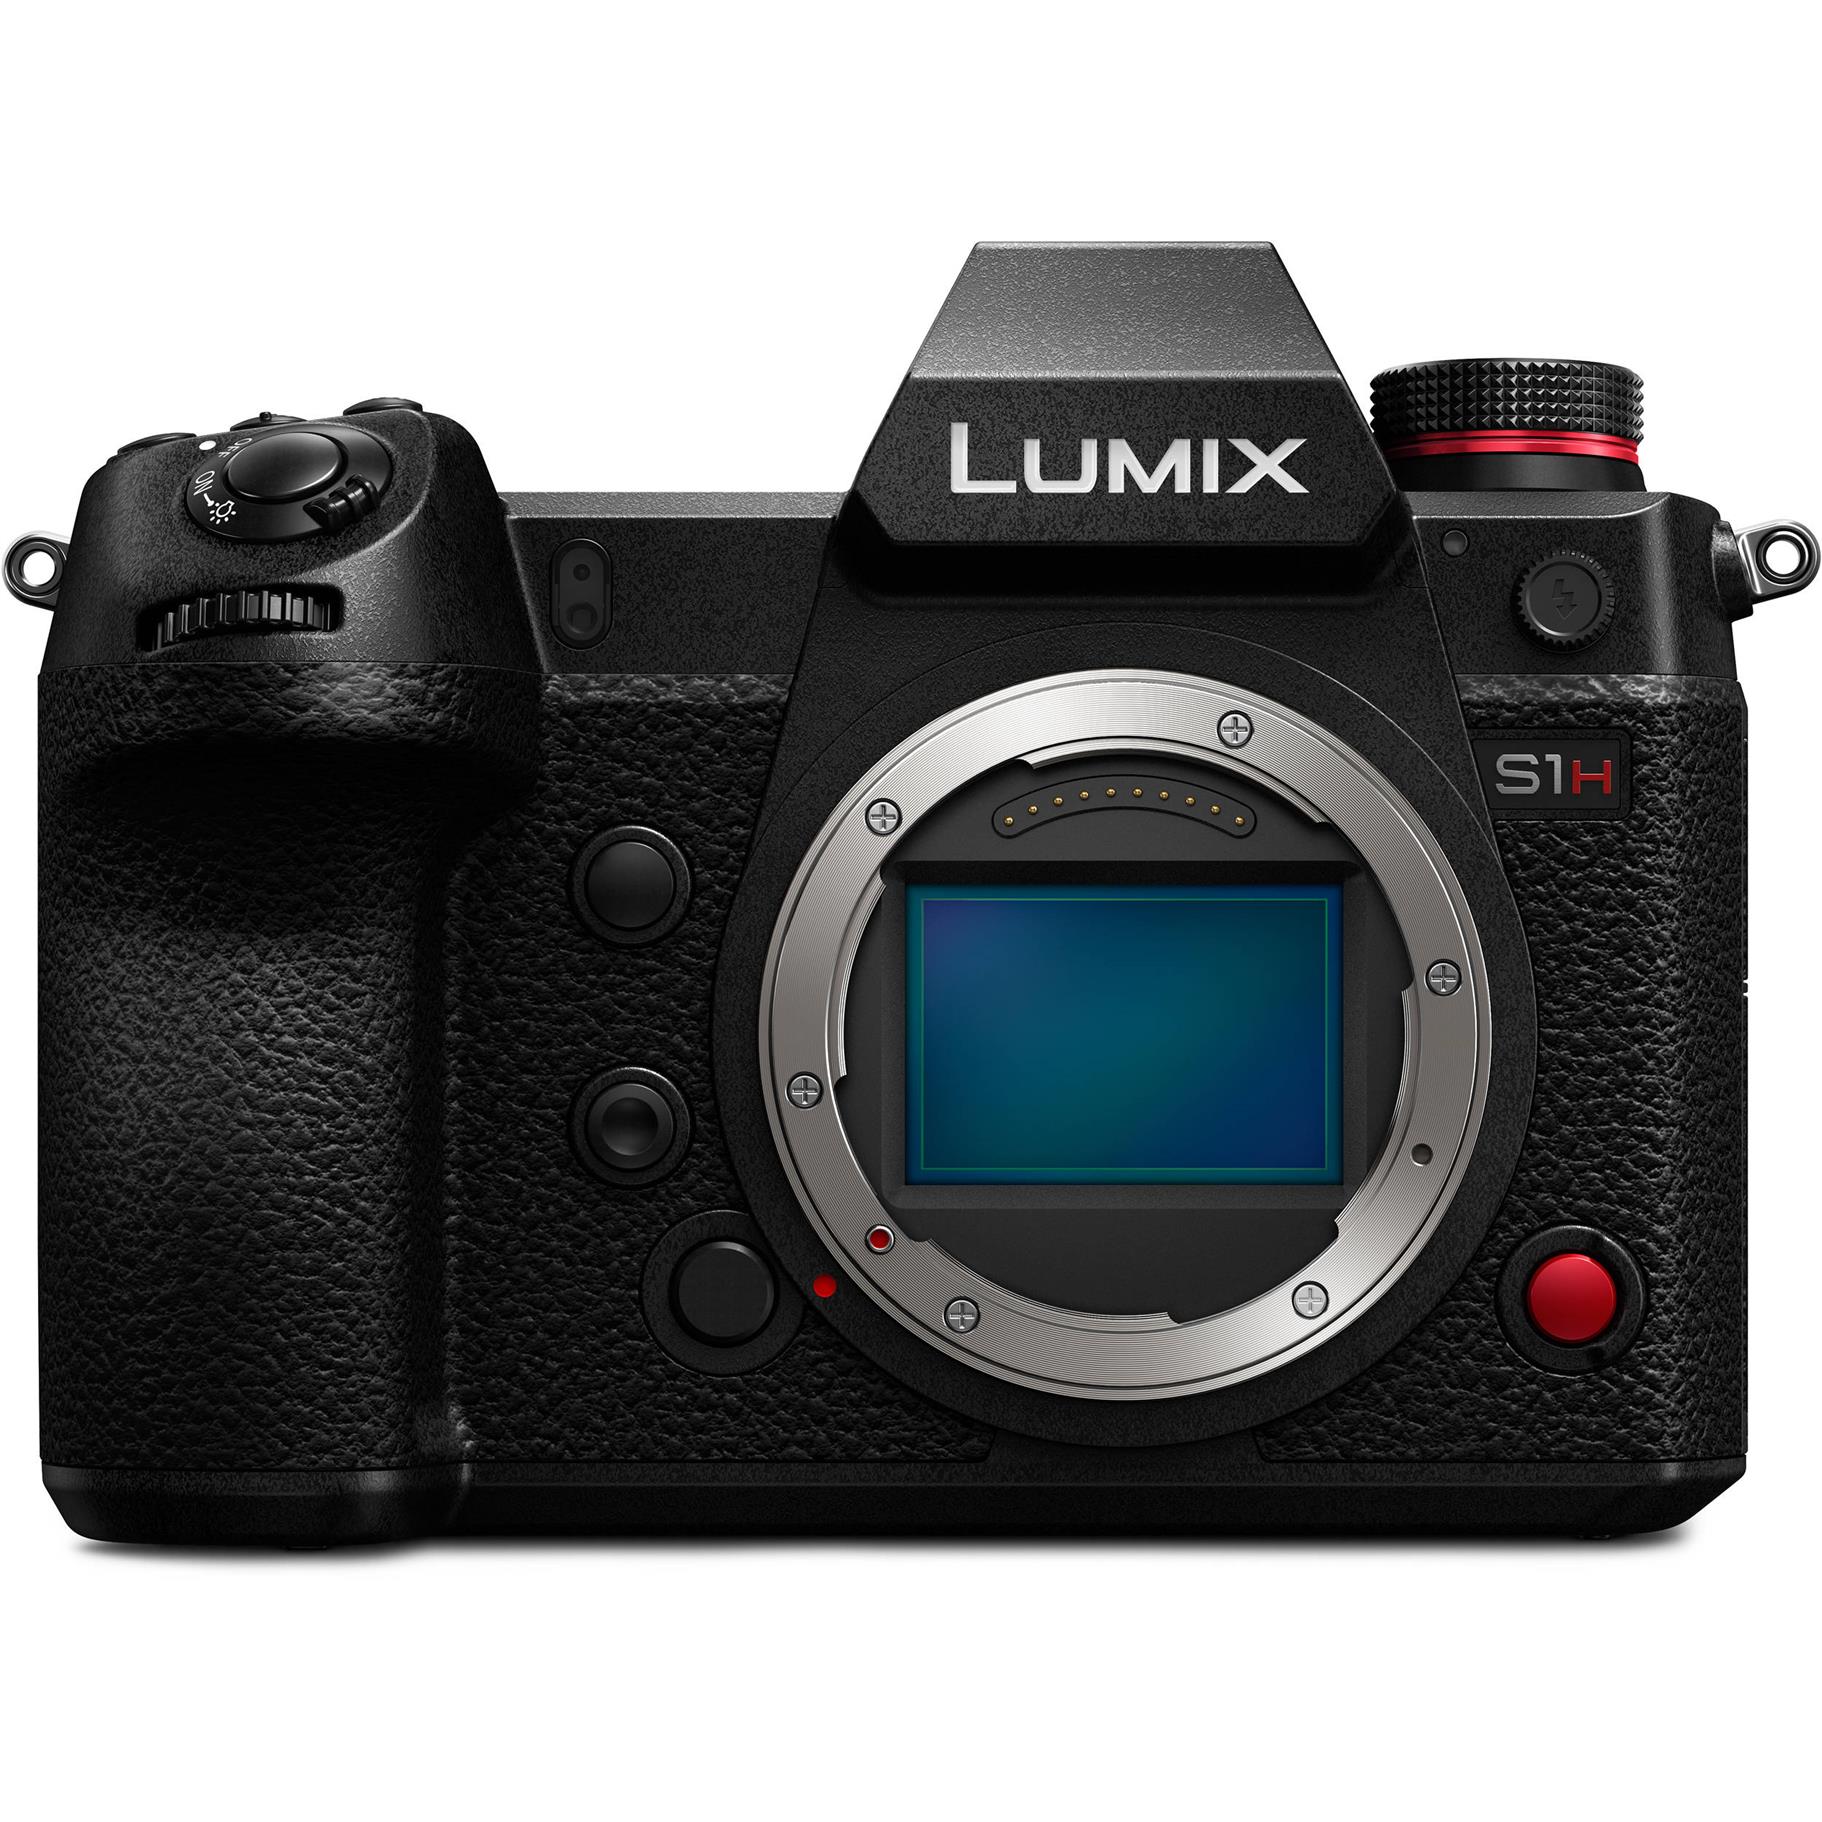 Panasonic Lumix DC-S1H Mirrorless Digital Camera (Body Only) with Atomos Ninja V 5" 4K HDMI Recording Monitor & Essential Bundle - Includes: Water Resistant Backpack, 1x Replacement Battery & More - image 5 of 7